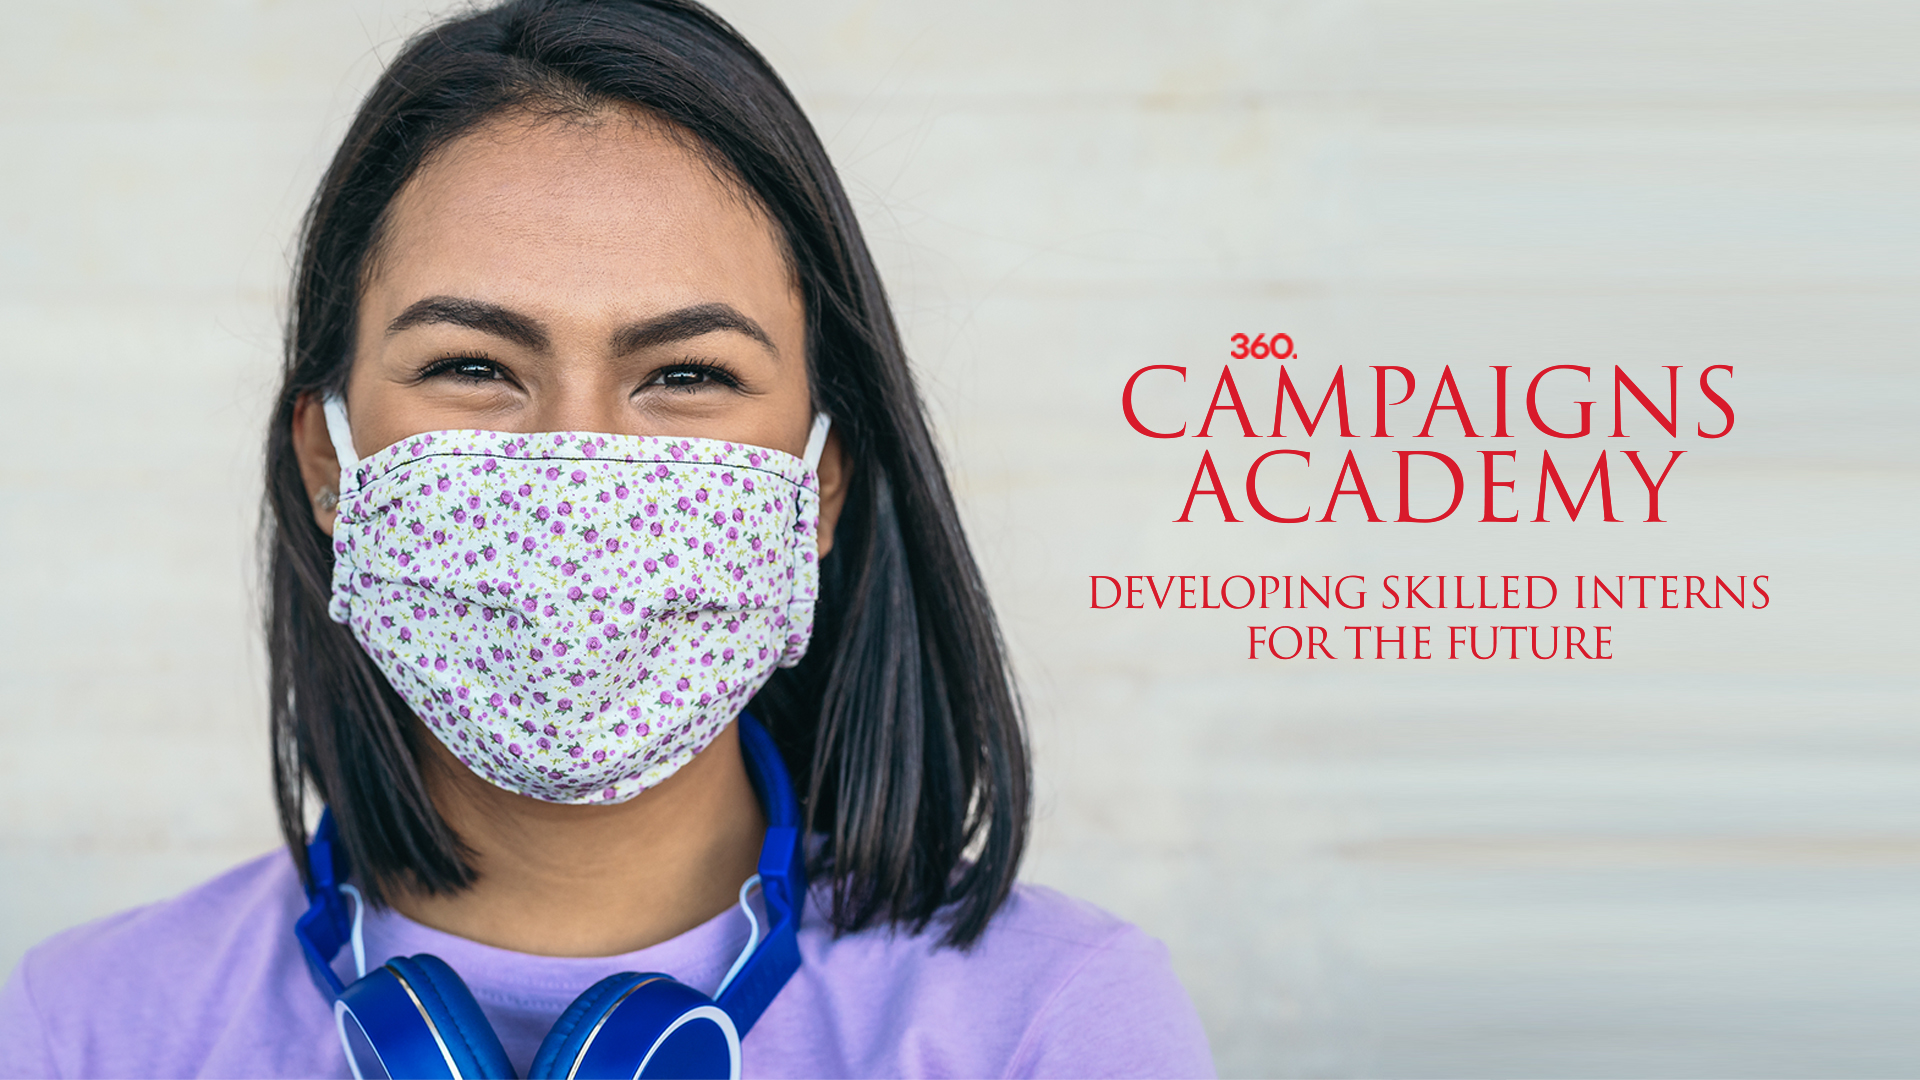 Campaigns Academy: Developing Skilled Interns For The Future